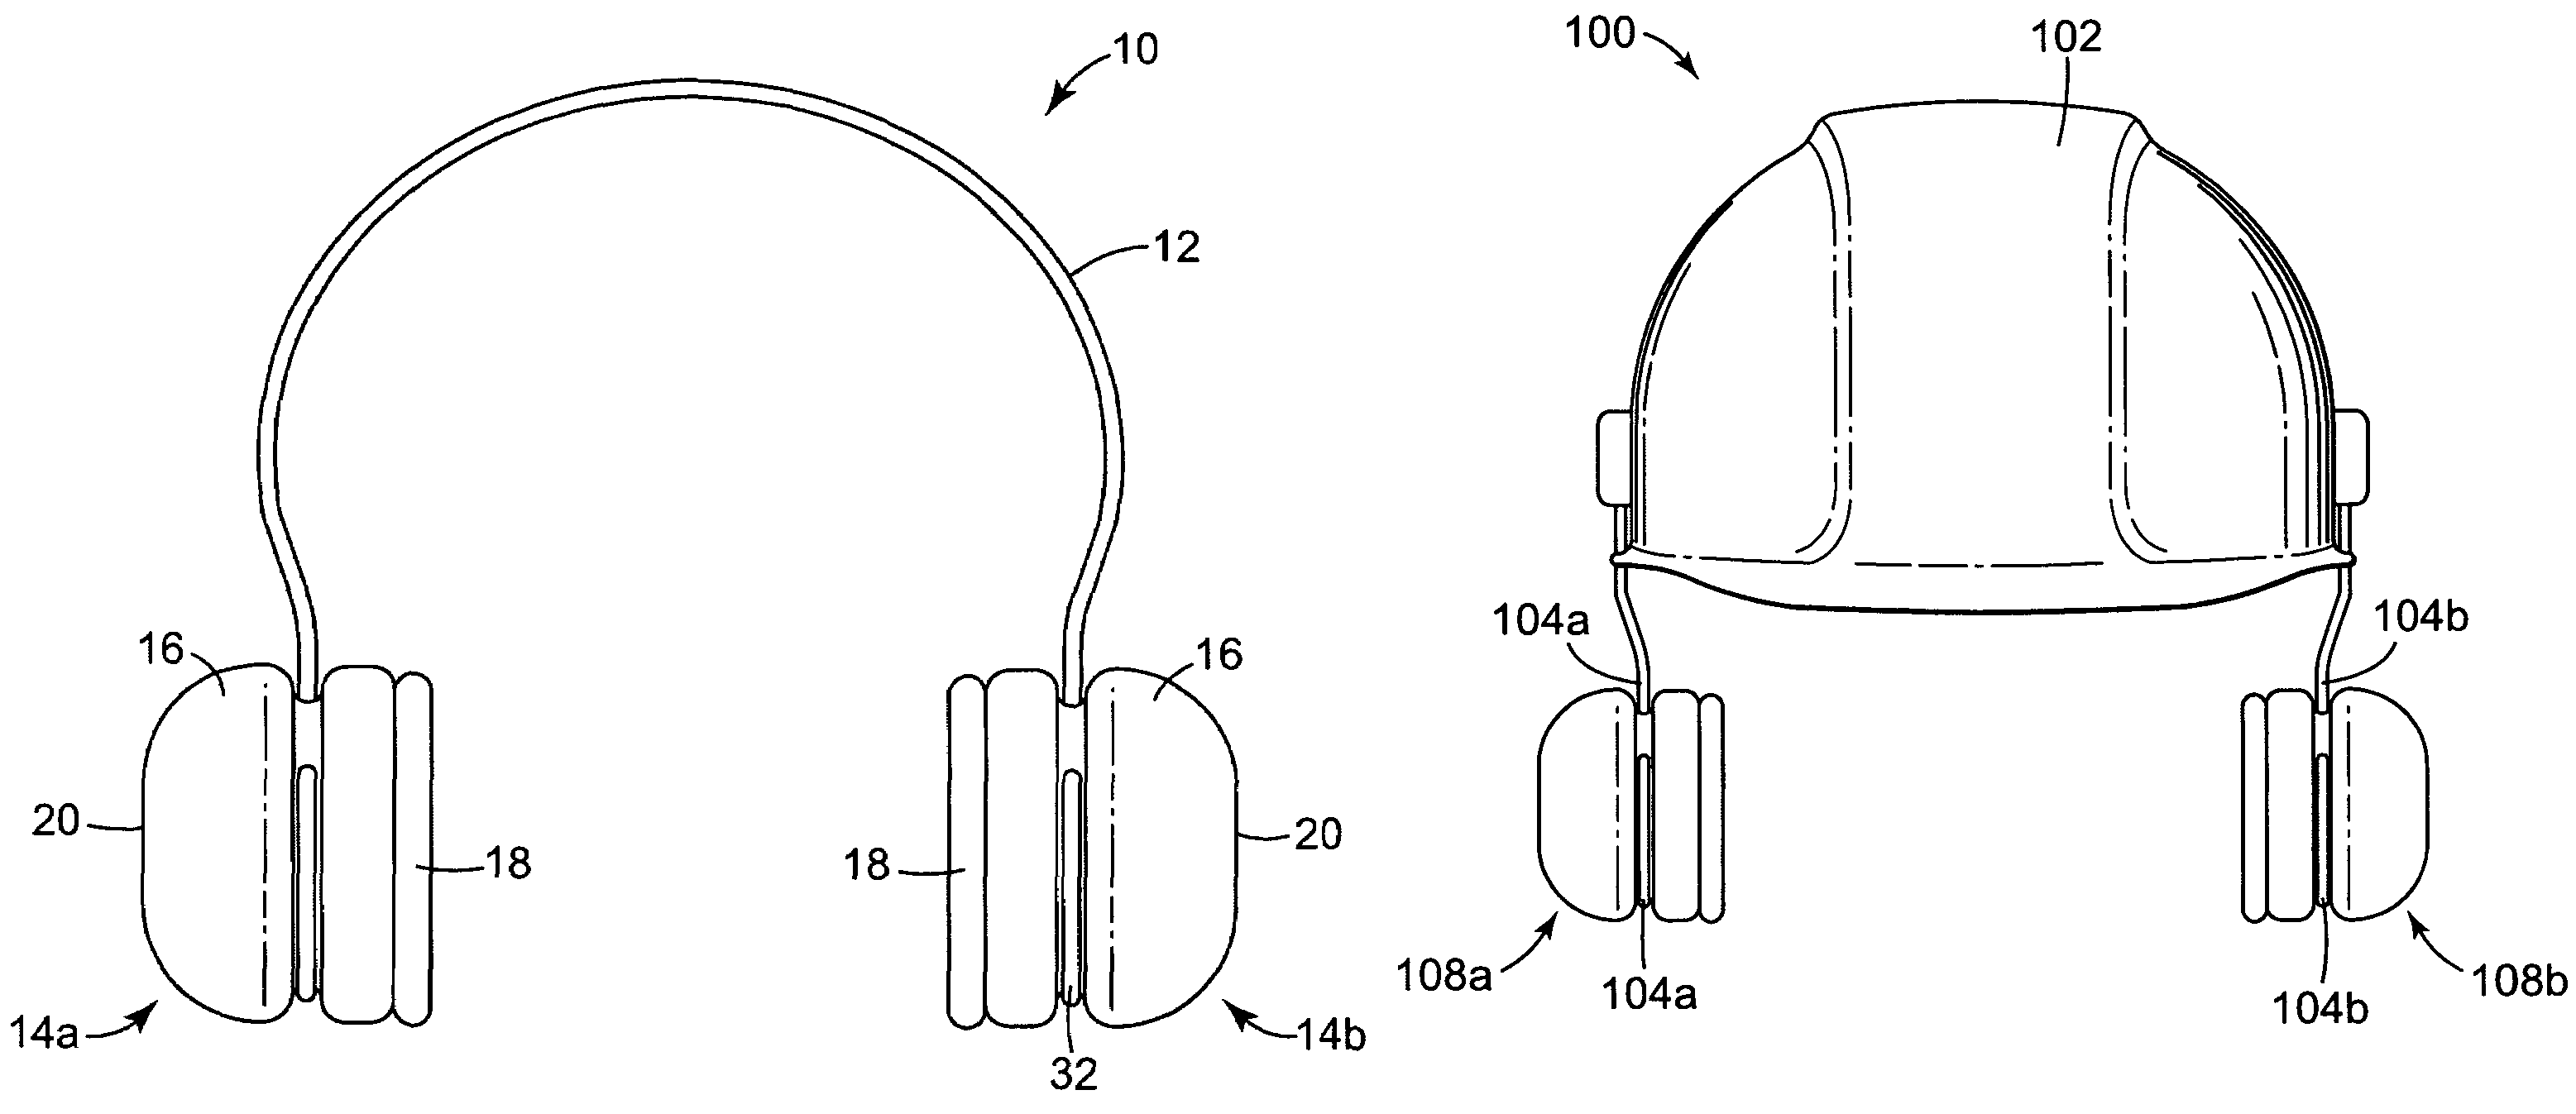 Hearing protective device that includes cellular earmuffs